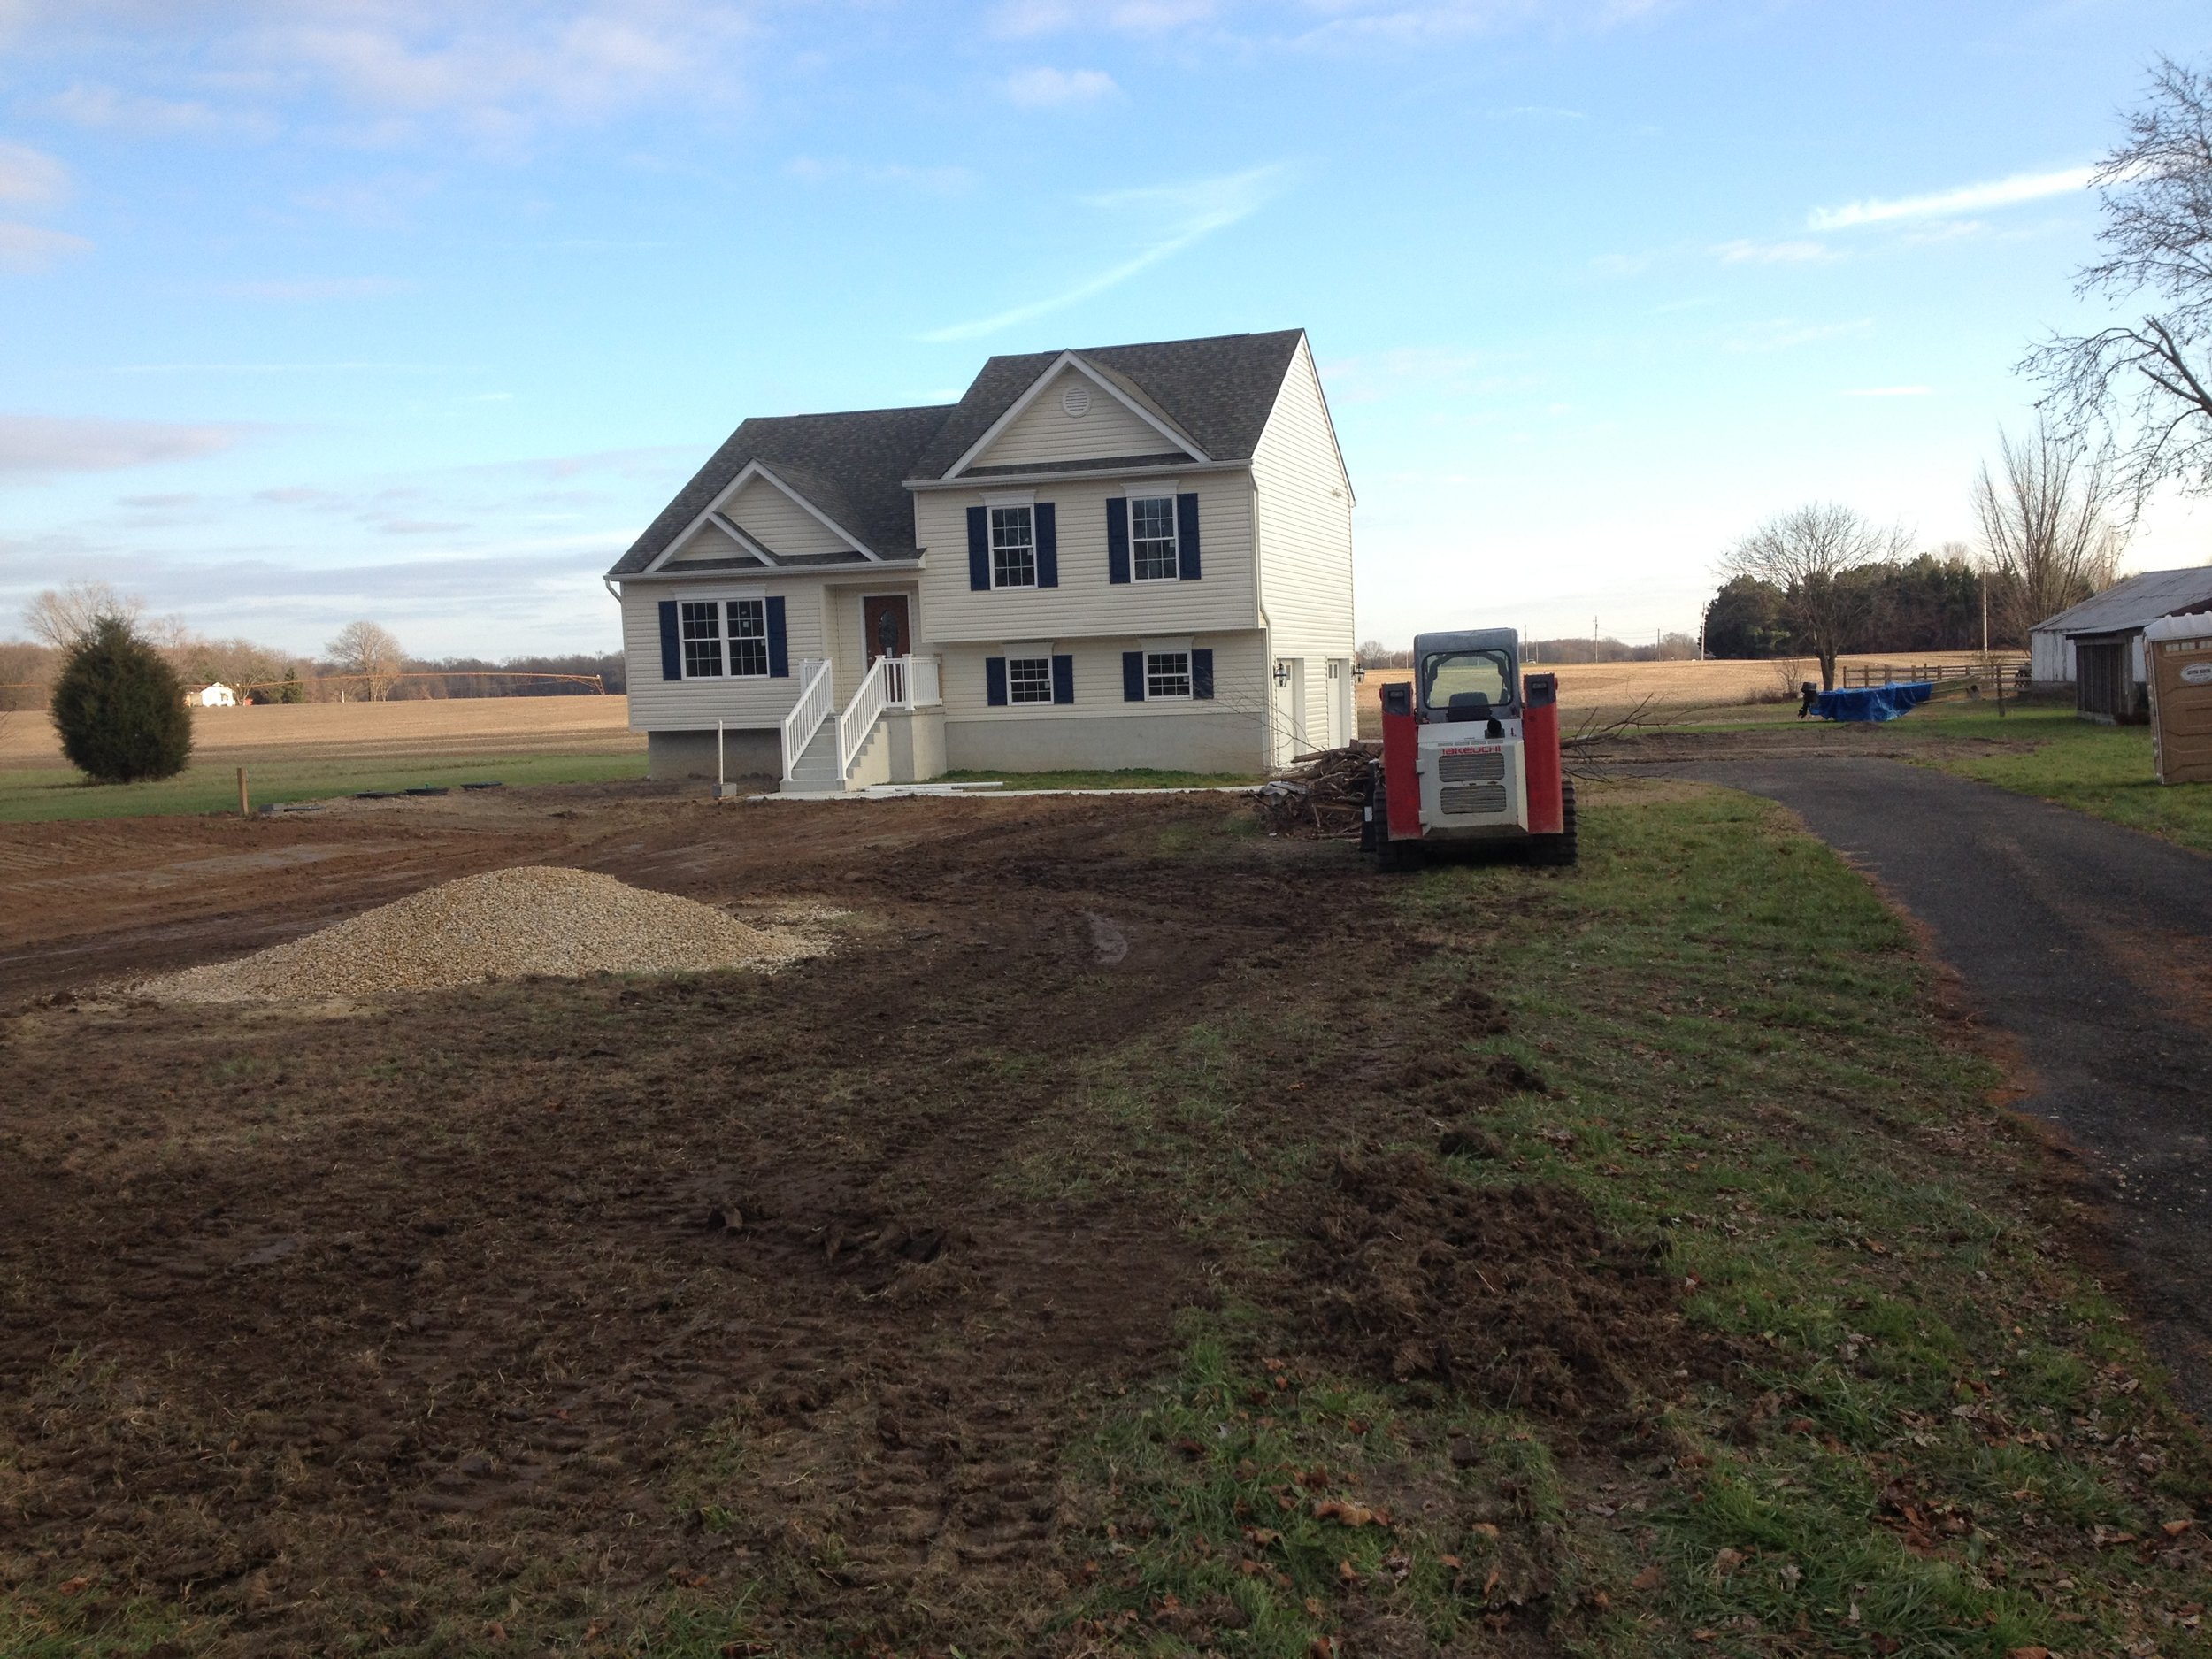 Grading yard after sand mound install | Shore Quality Contracting, LLC